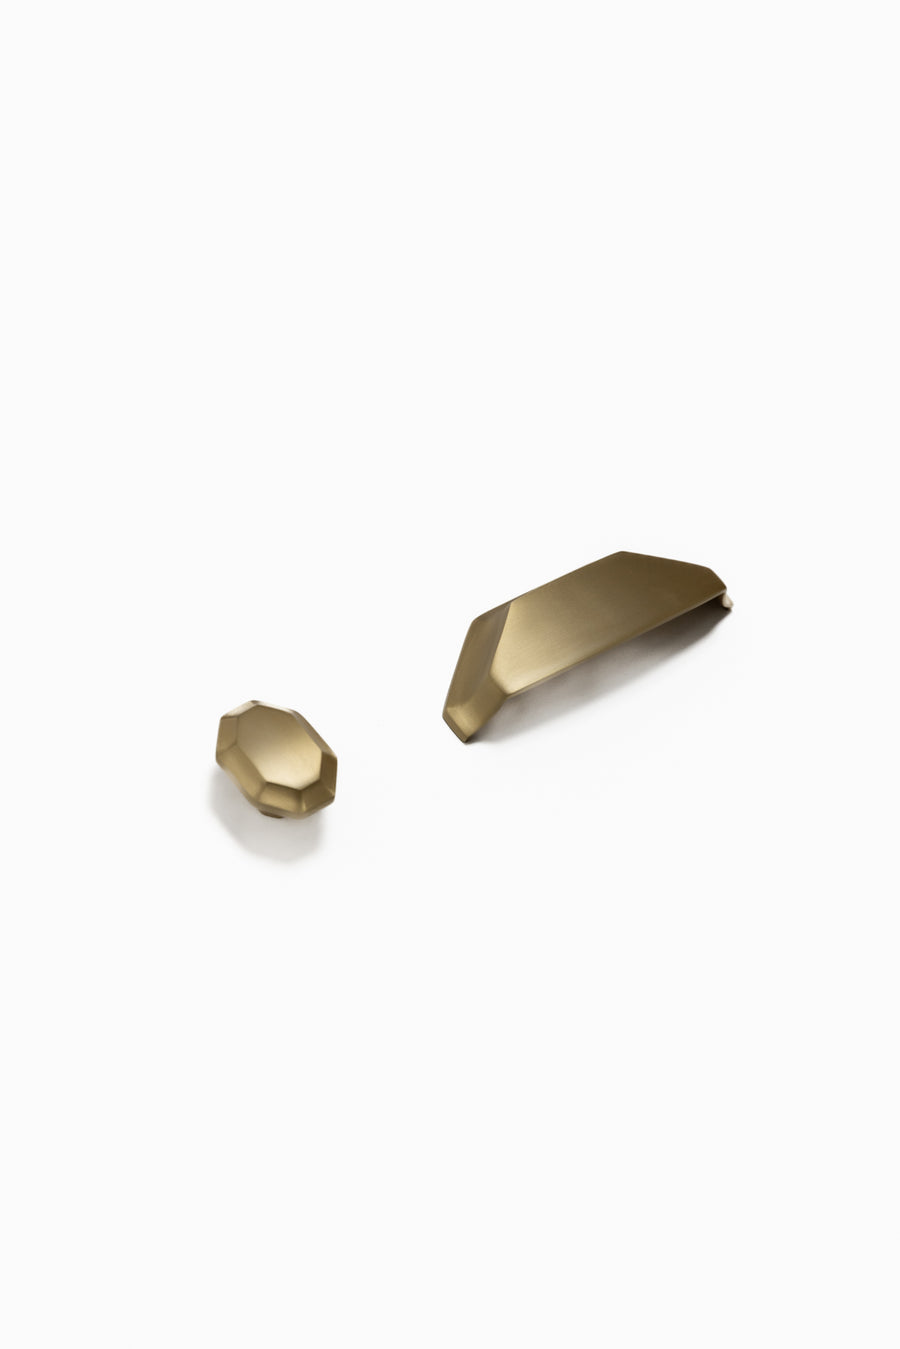 Archie Brass Geometric Cabinetry Knob - Little Swagger